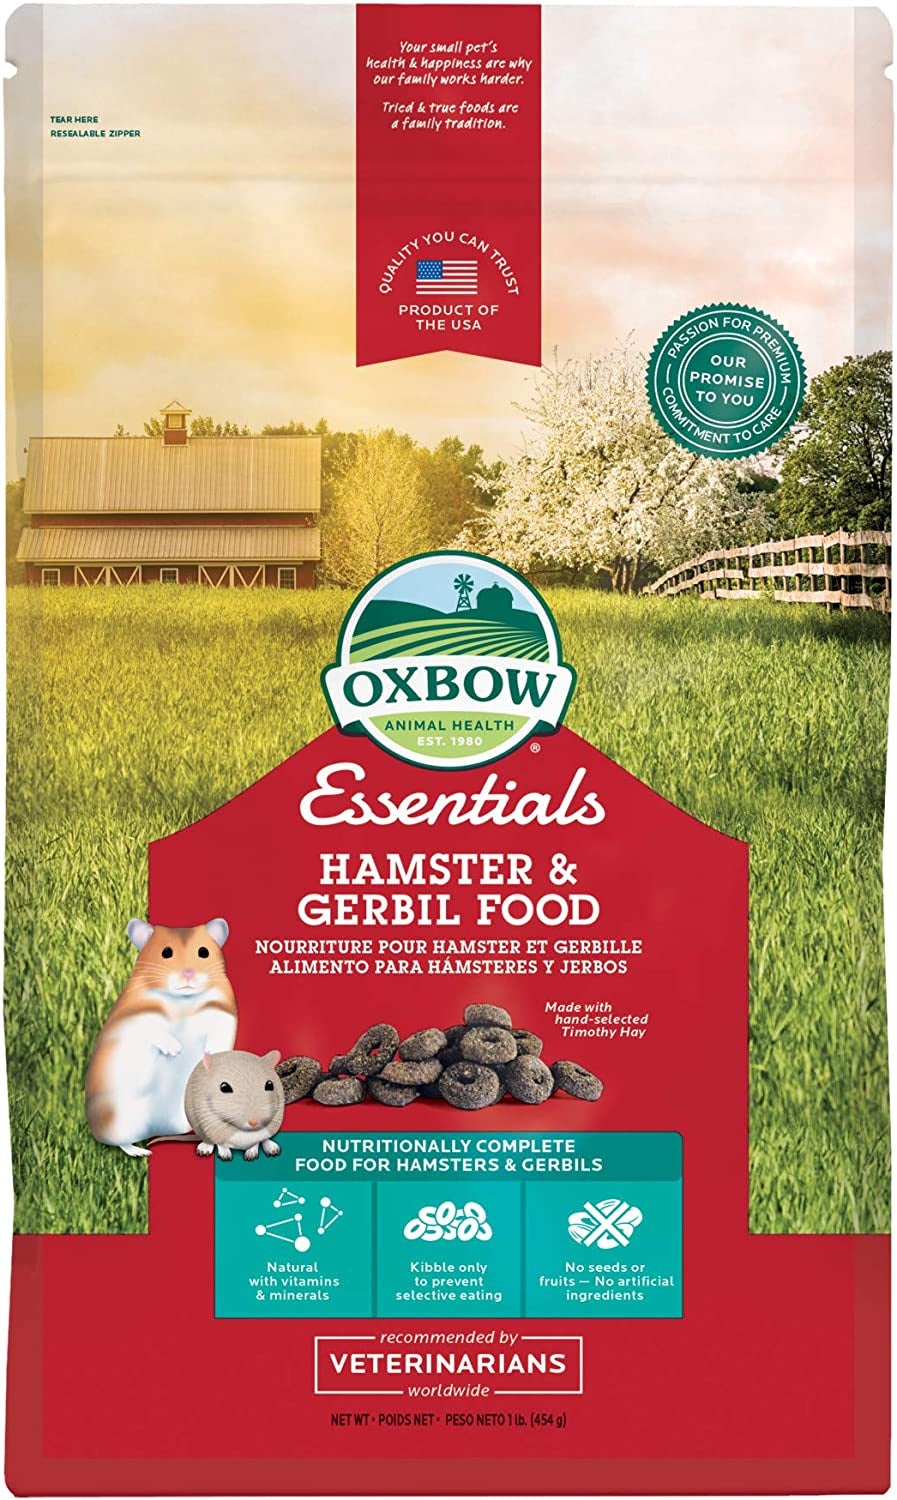 Oxbow Essentials Hamster Food and Gerbil Food - All Natural Hamster and Gerbil Food - 1 Lb.